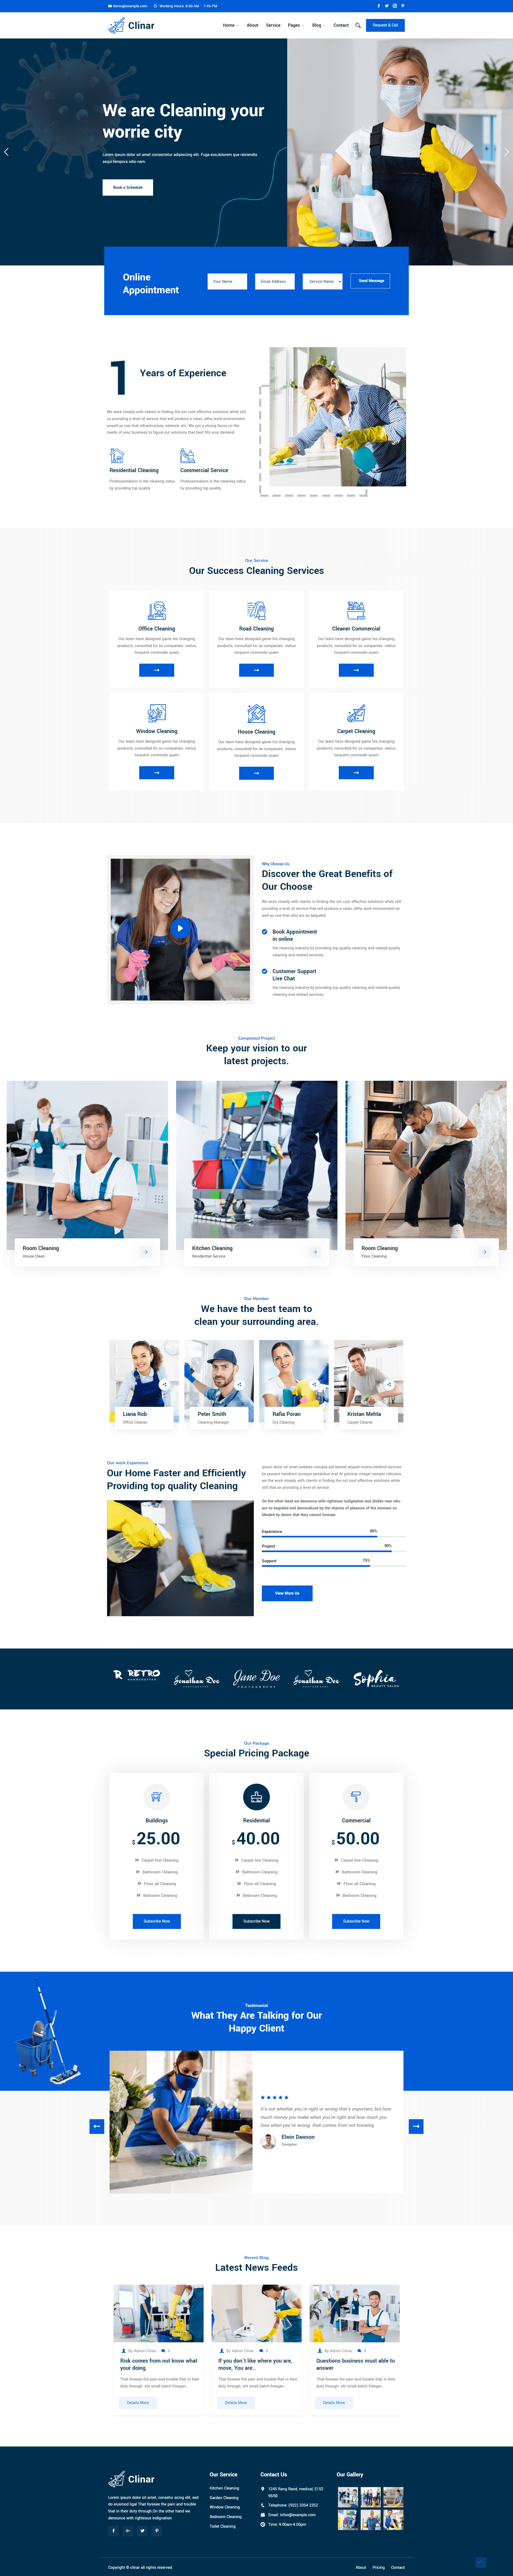 Home Services Website Template